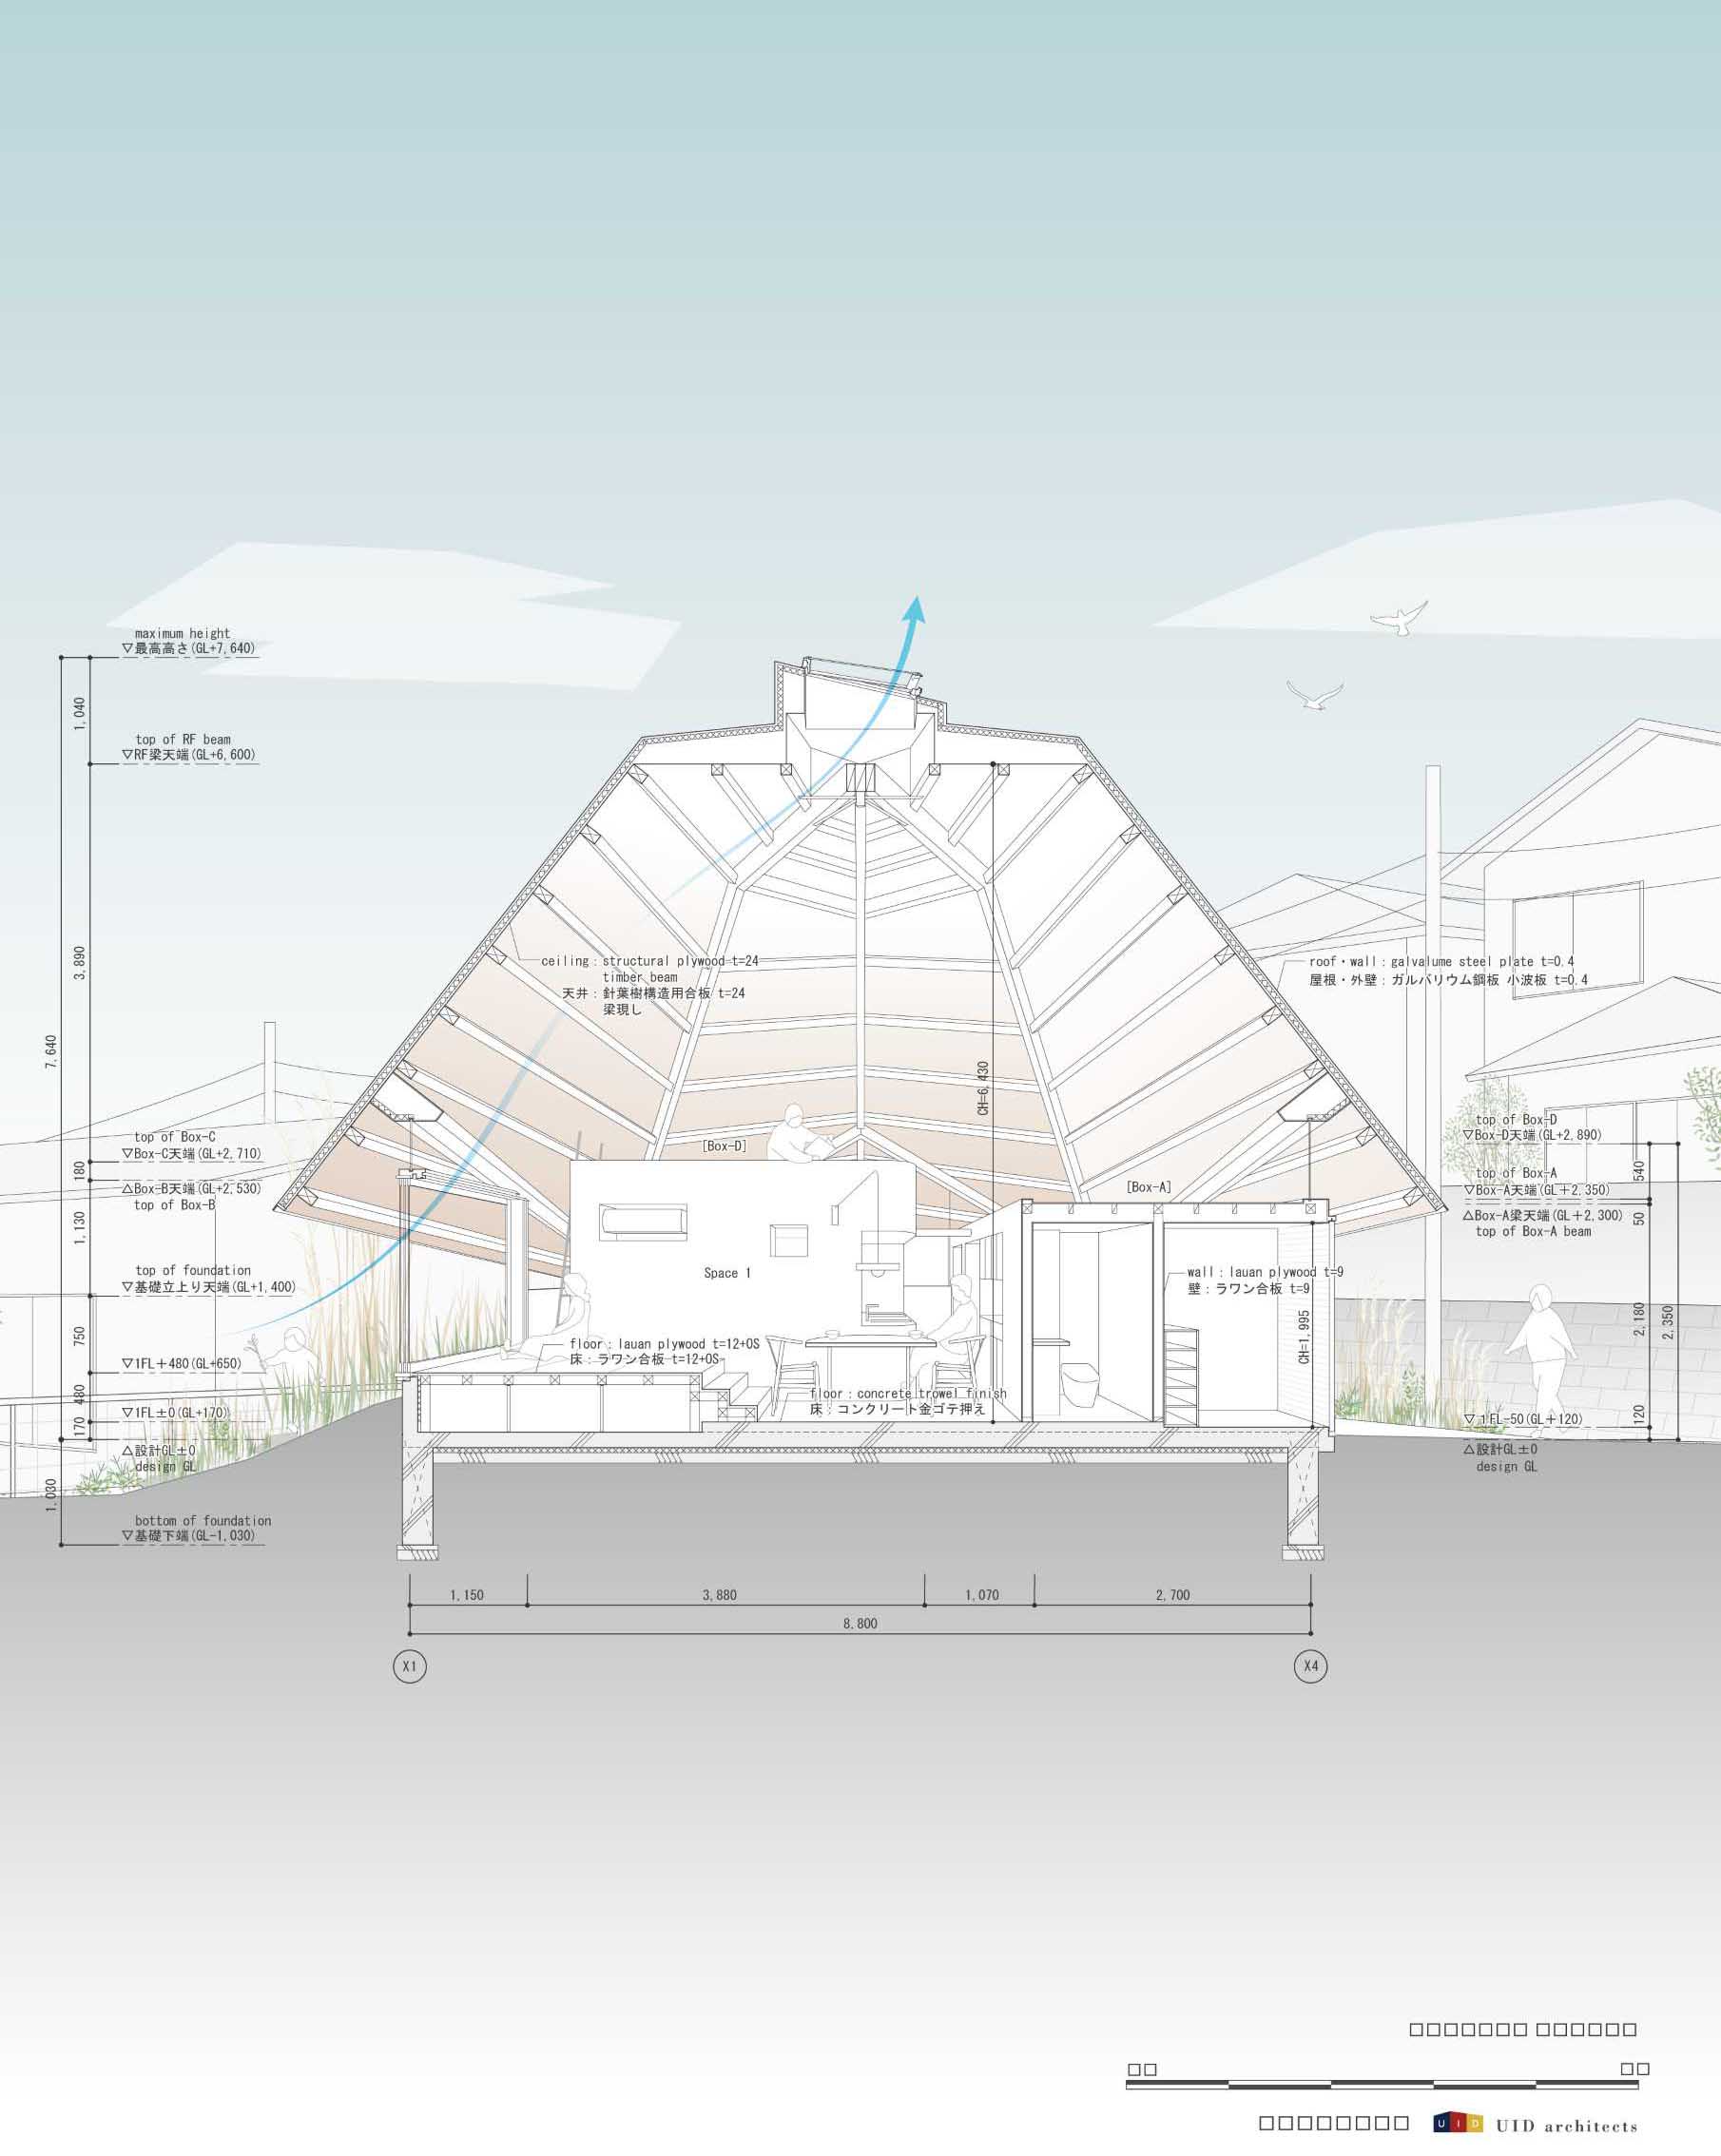 The layout of a modern house with an octagonal design that was inspired by a spiderweb.